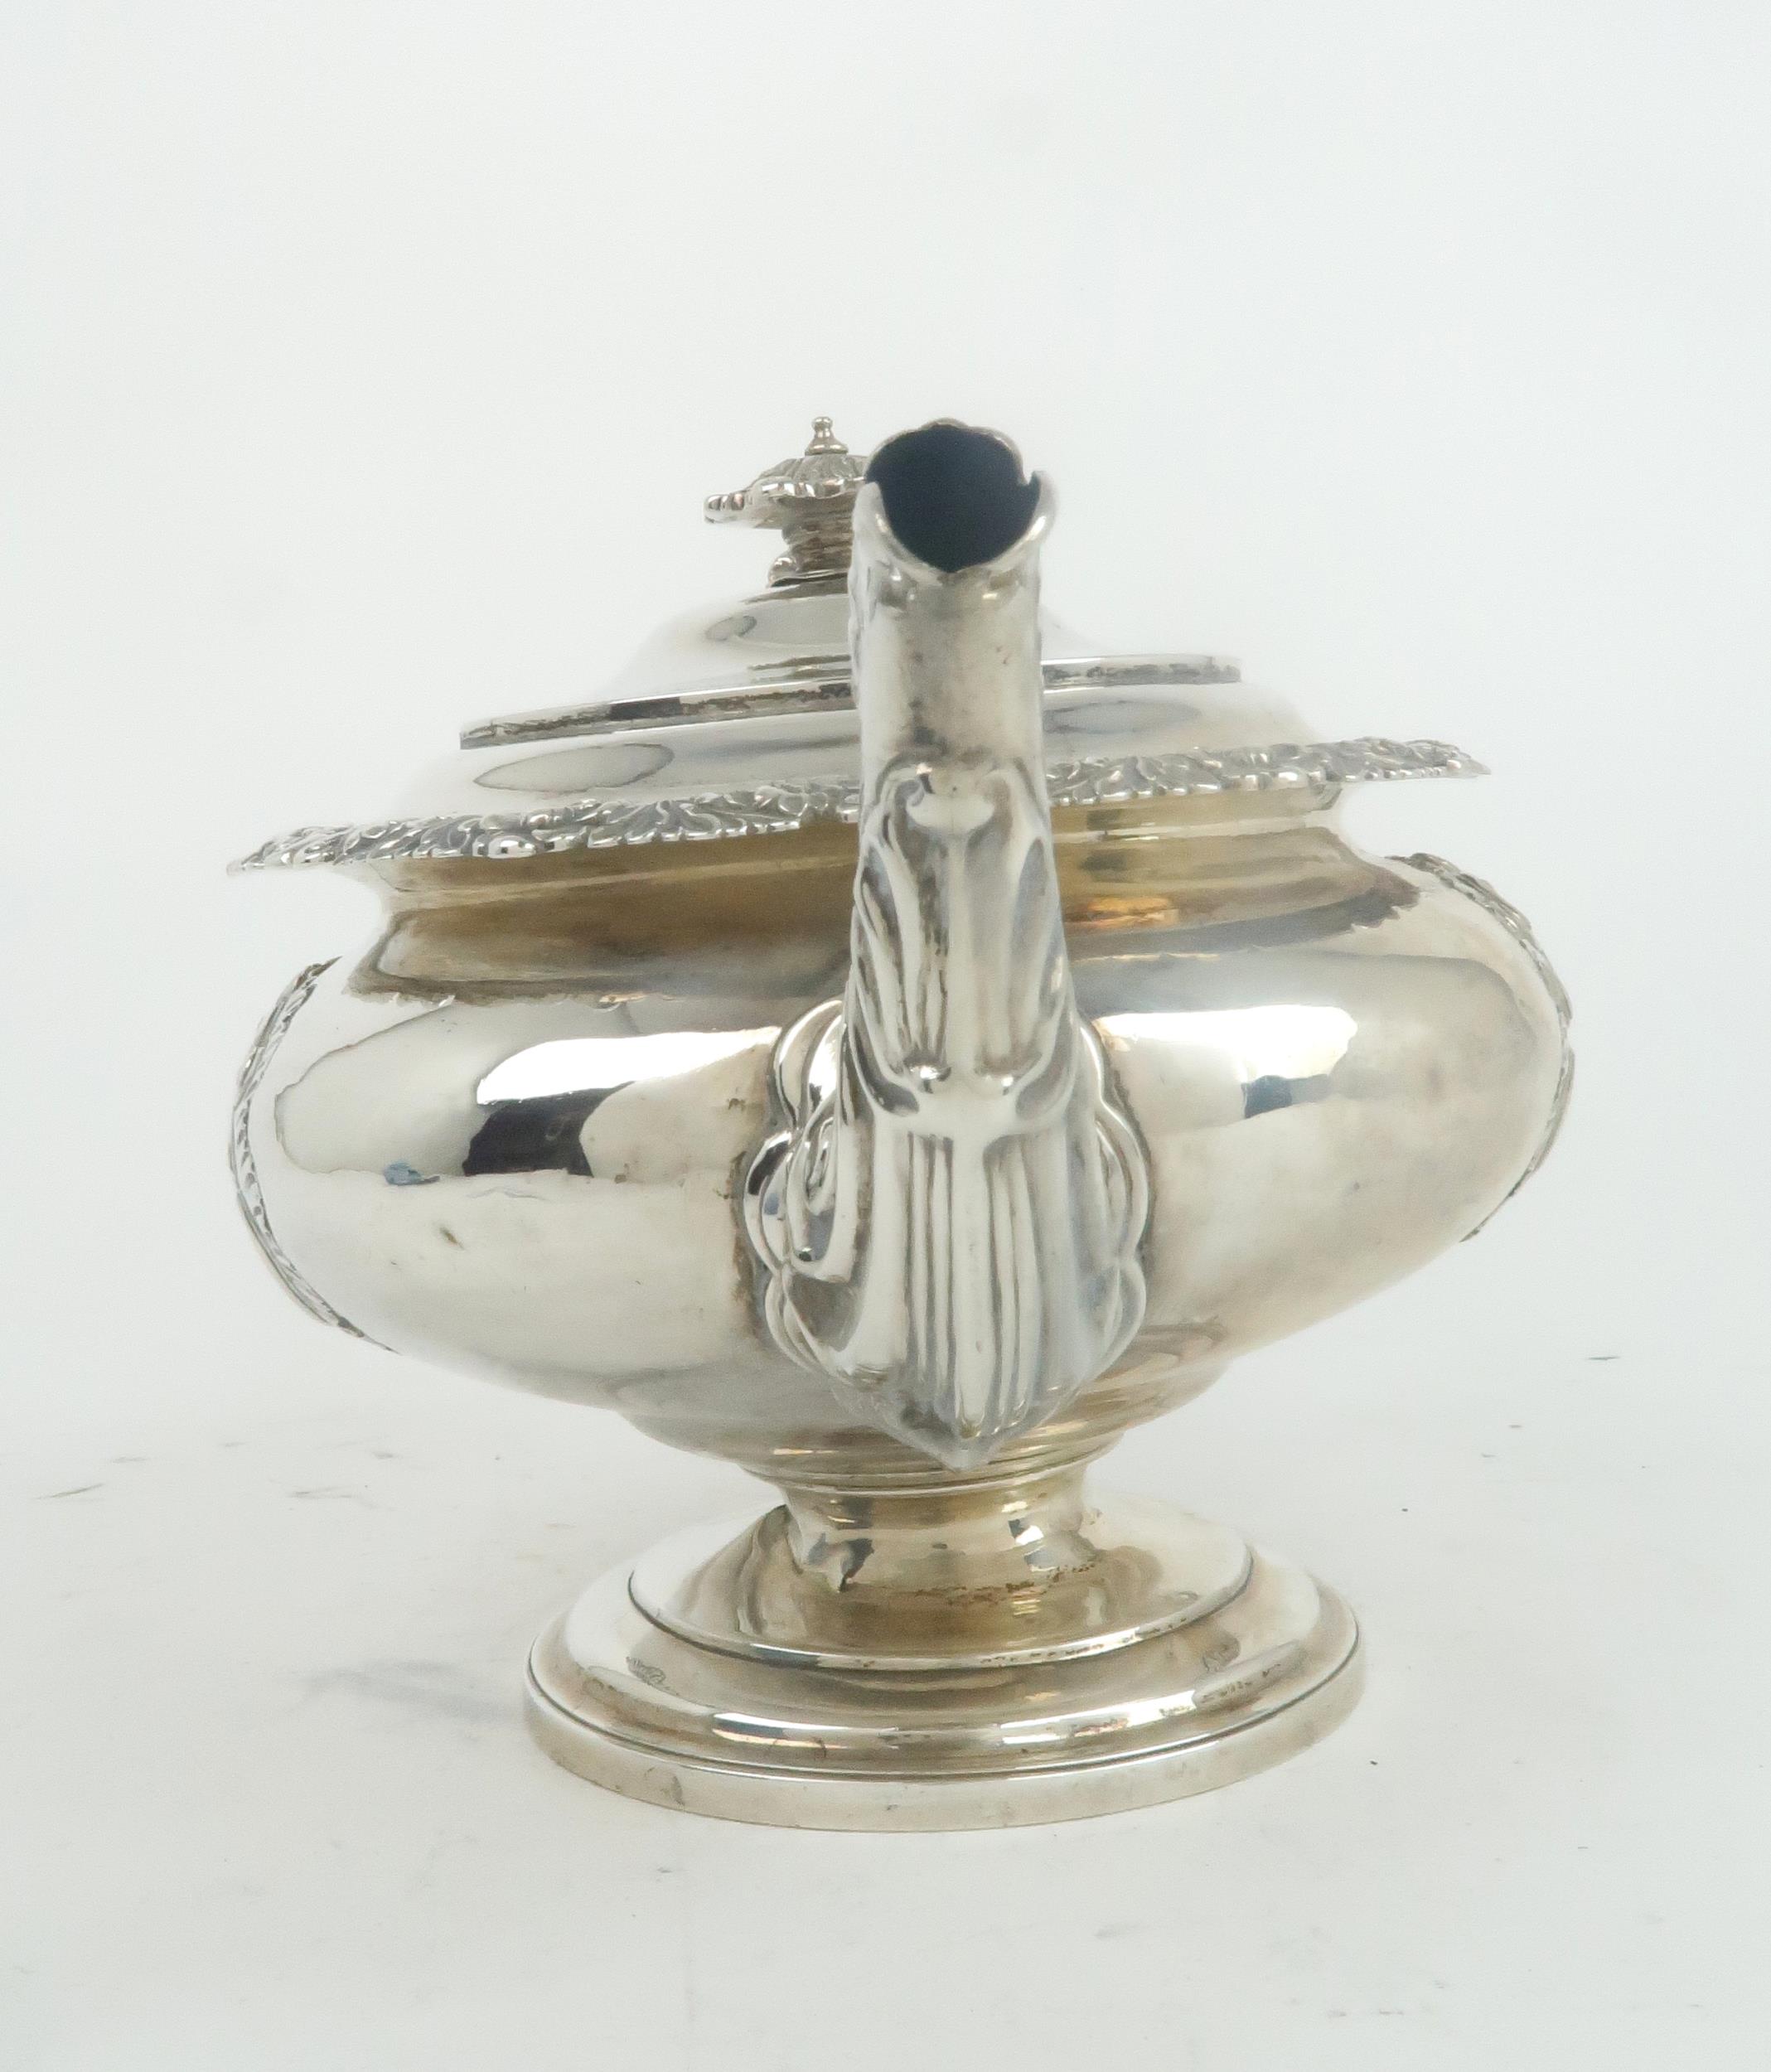 A GEORGE IV SCOTTISH SILVER TEAPOT by J Hay, Edinburgh 1820, of squat circular form, with an - Image 3 of 9